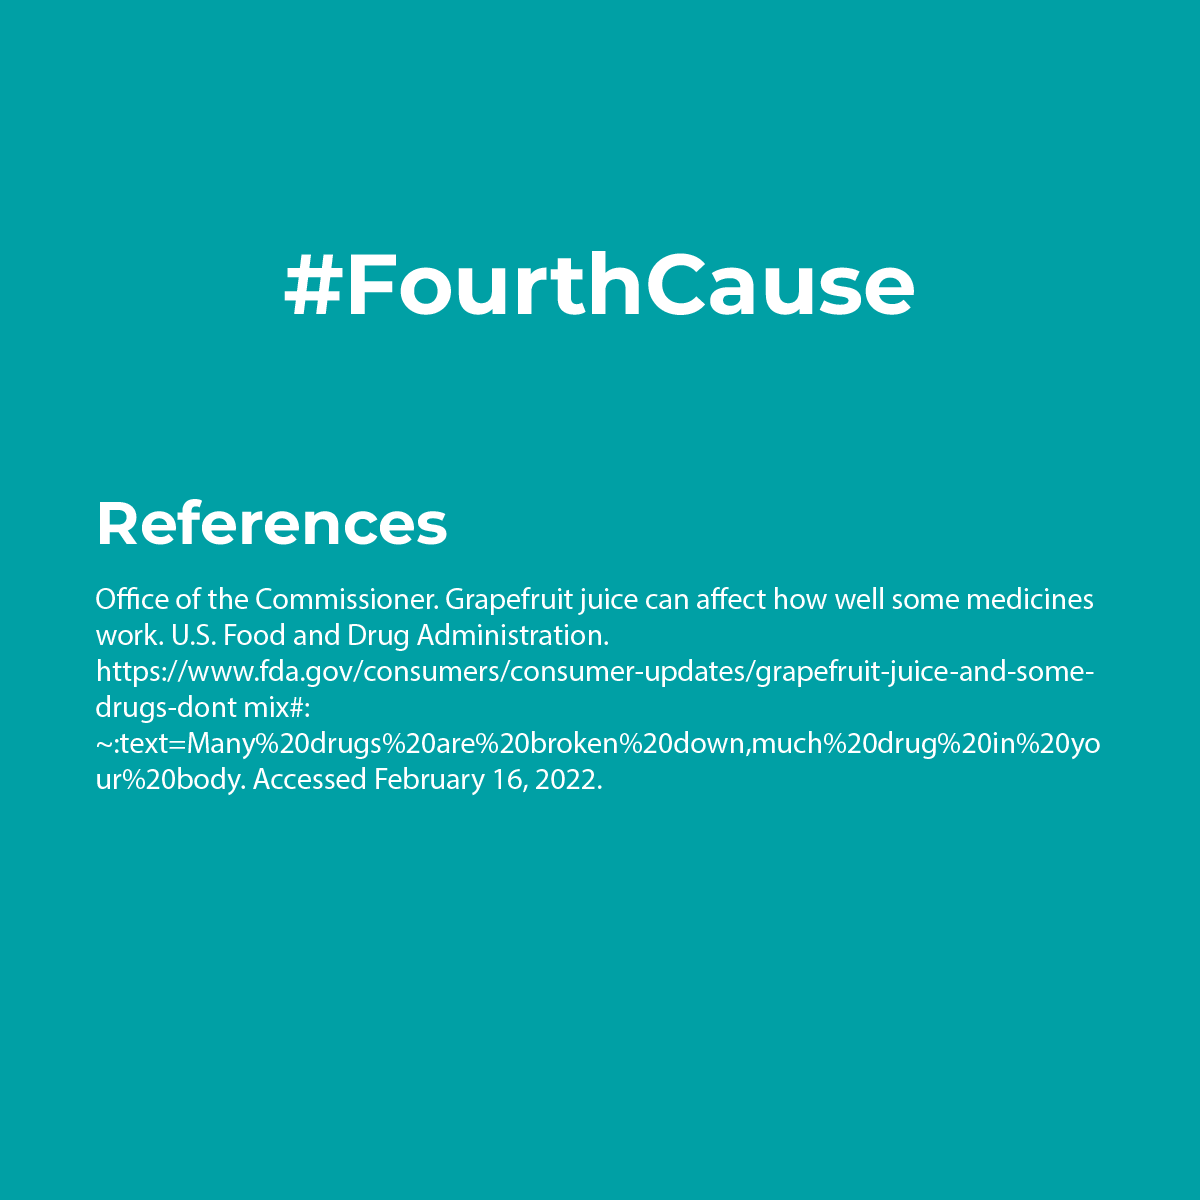 📍Visit fourthcause.org/events to learn about ADEs, prevention strategies, and the Right Drug Dose Now Act.

🖊To sign-on to support the Right Act visit fourthcause.org/rightact.

#FourthCause #AdverseDrugEvents #RightDrugDoseNowAct #PrecisionMedicine #InnovativeGxLaboratories